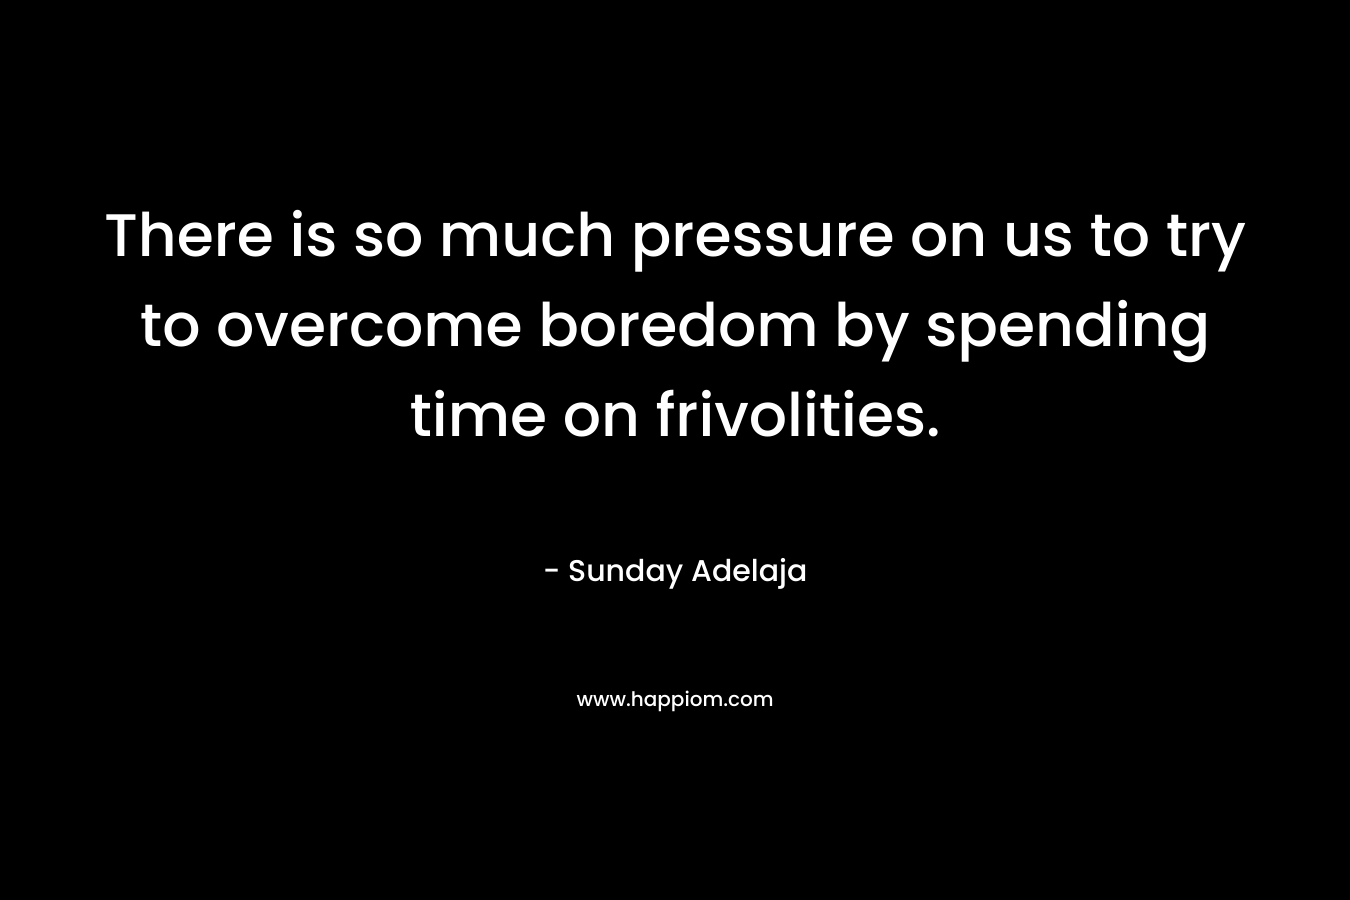 There is so much pressure on us to try to overcome boredom by spending time on frivolities.